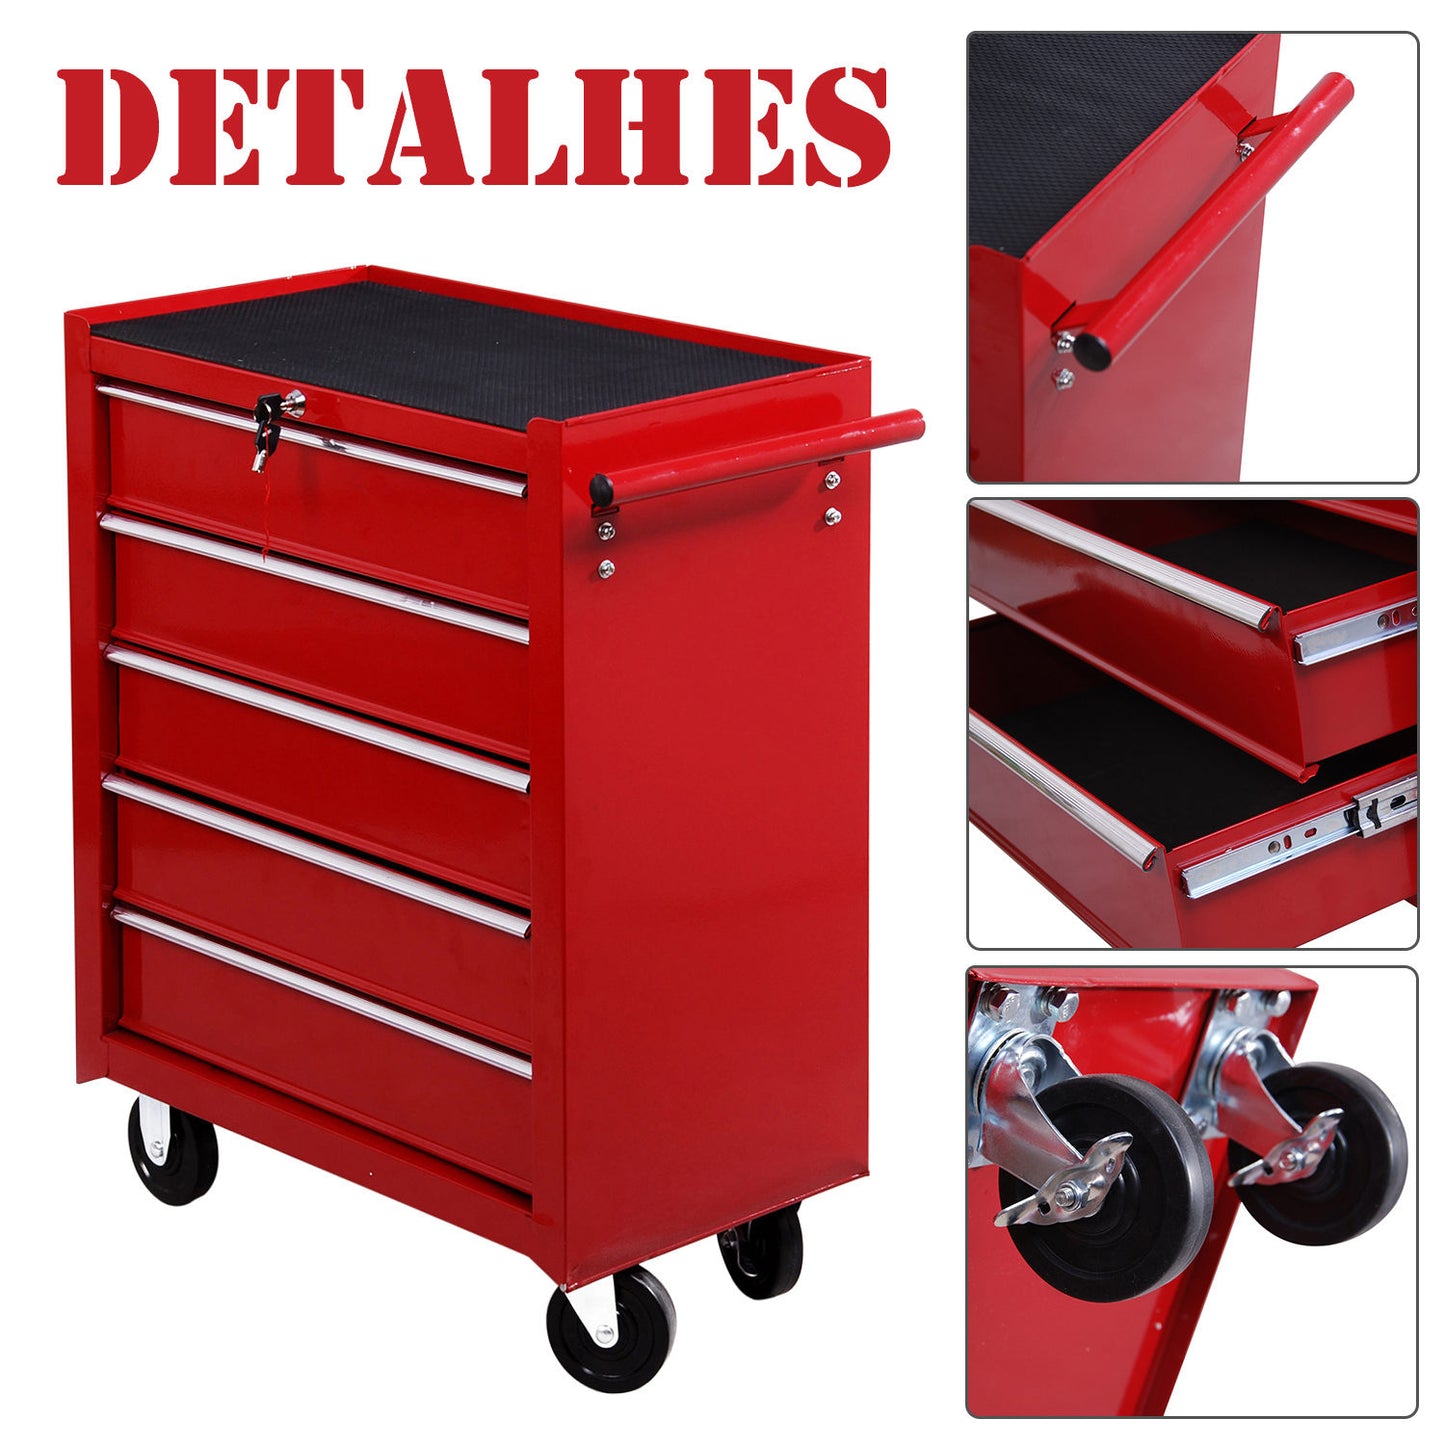 HOMCOM 5 Drawer Tool Chest on Wheels, Lockable Steel Tool Trolley with Side Handle for Workshop, Garage, Red